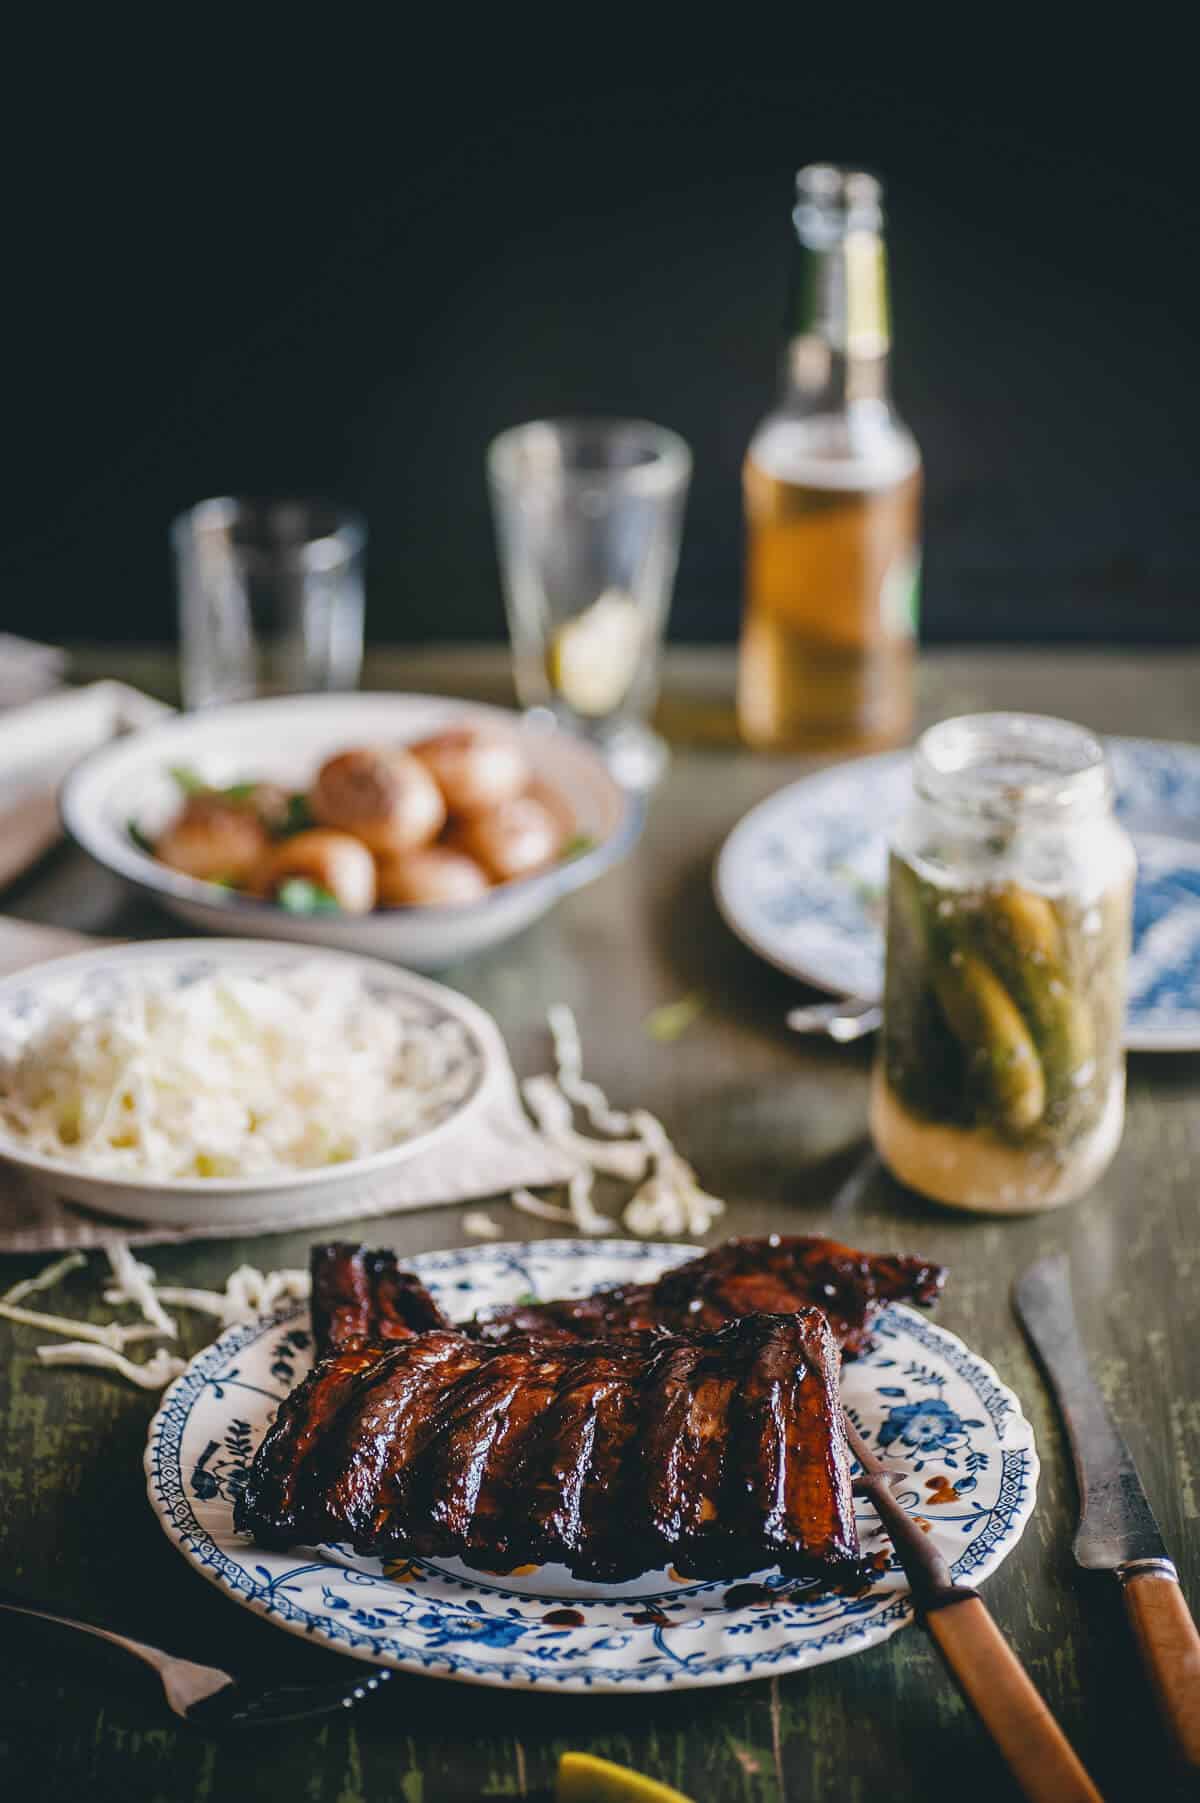 cooked ribs on a plate with coleslaw, baked potatoes and pickles